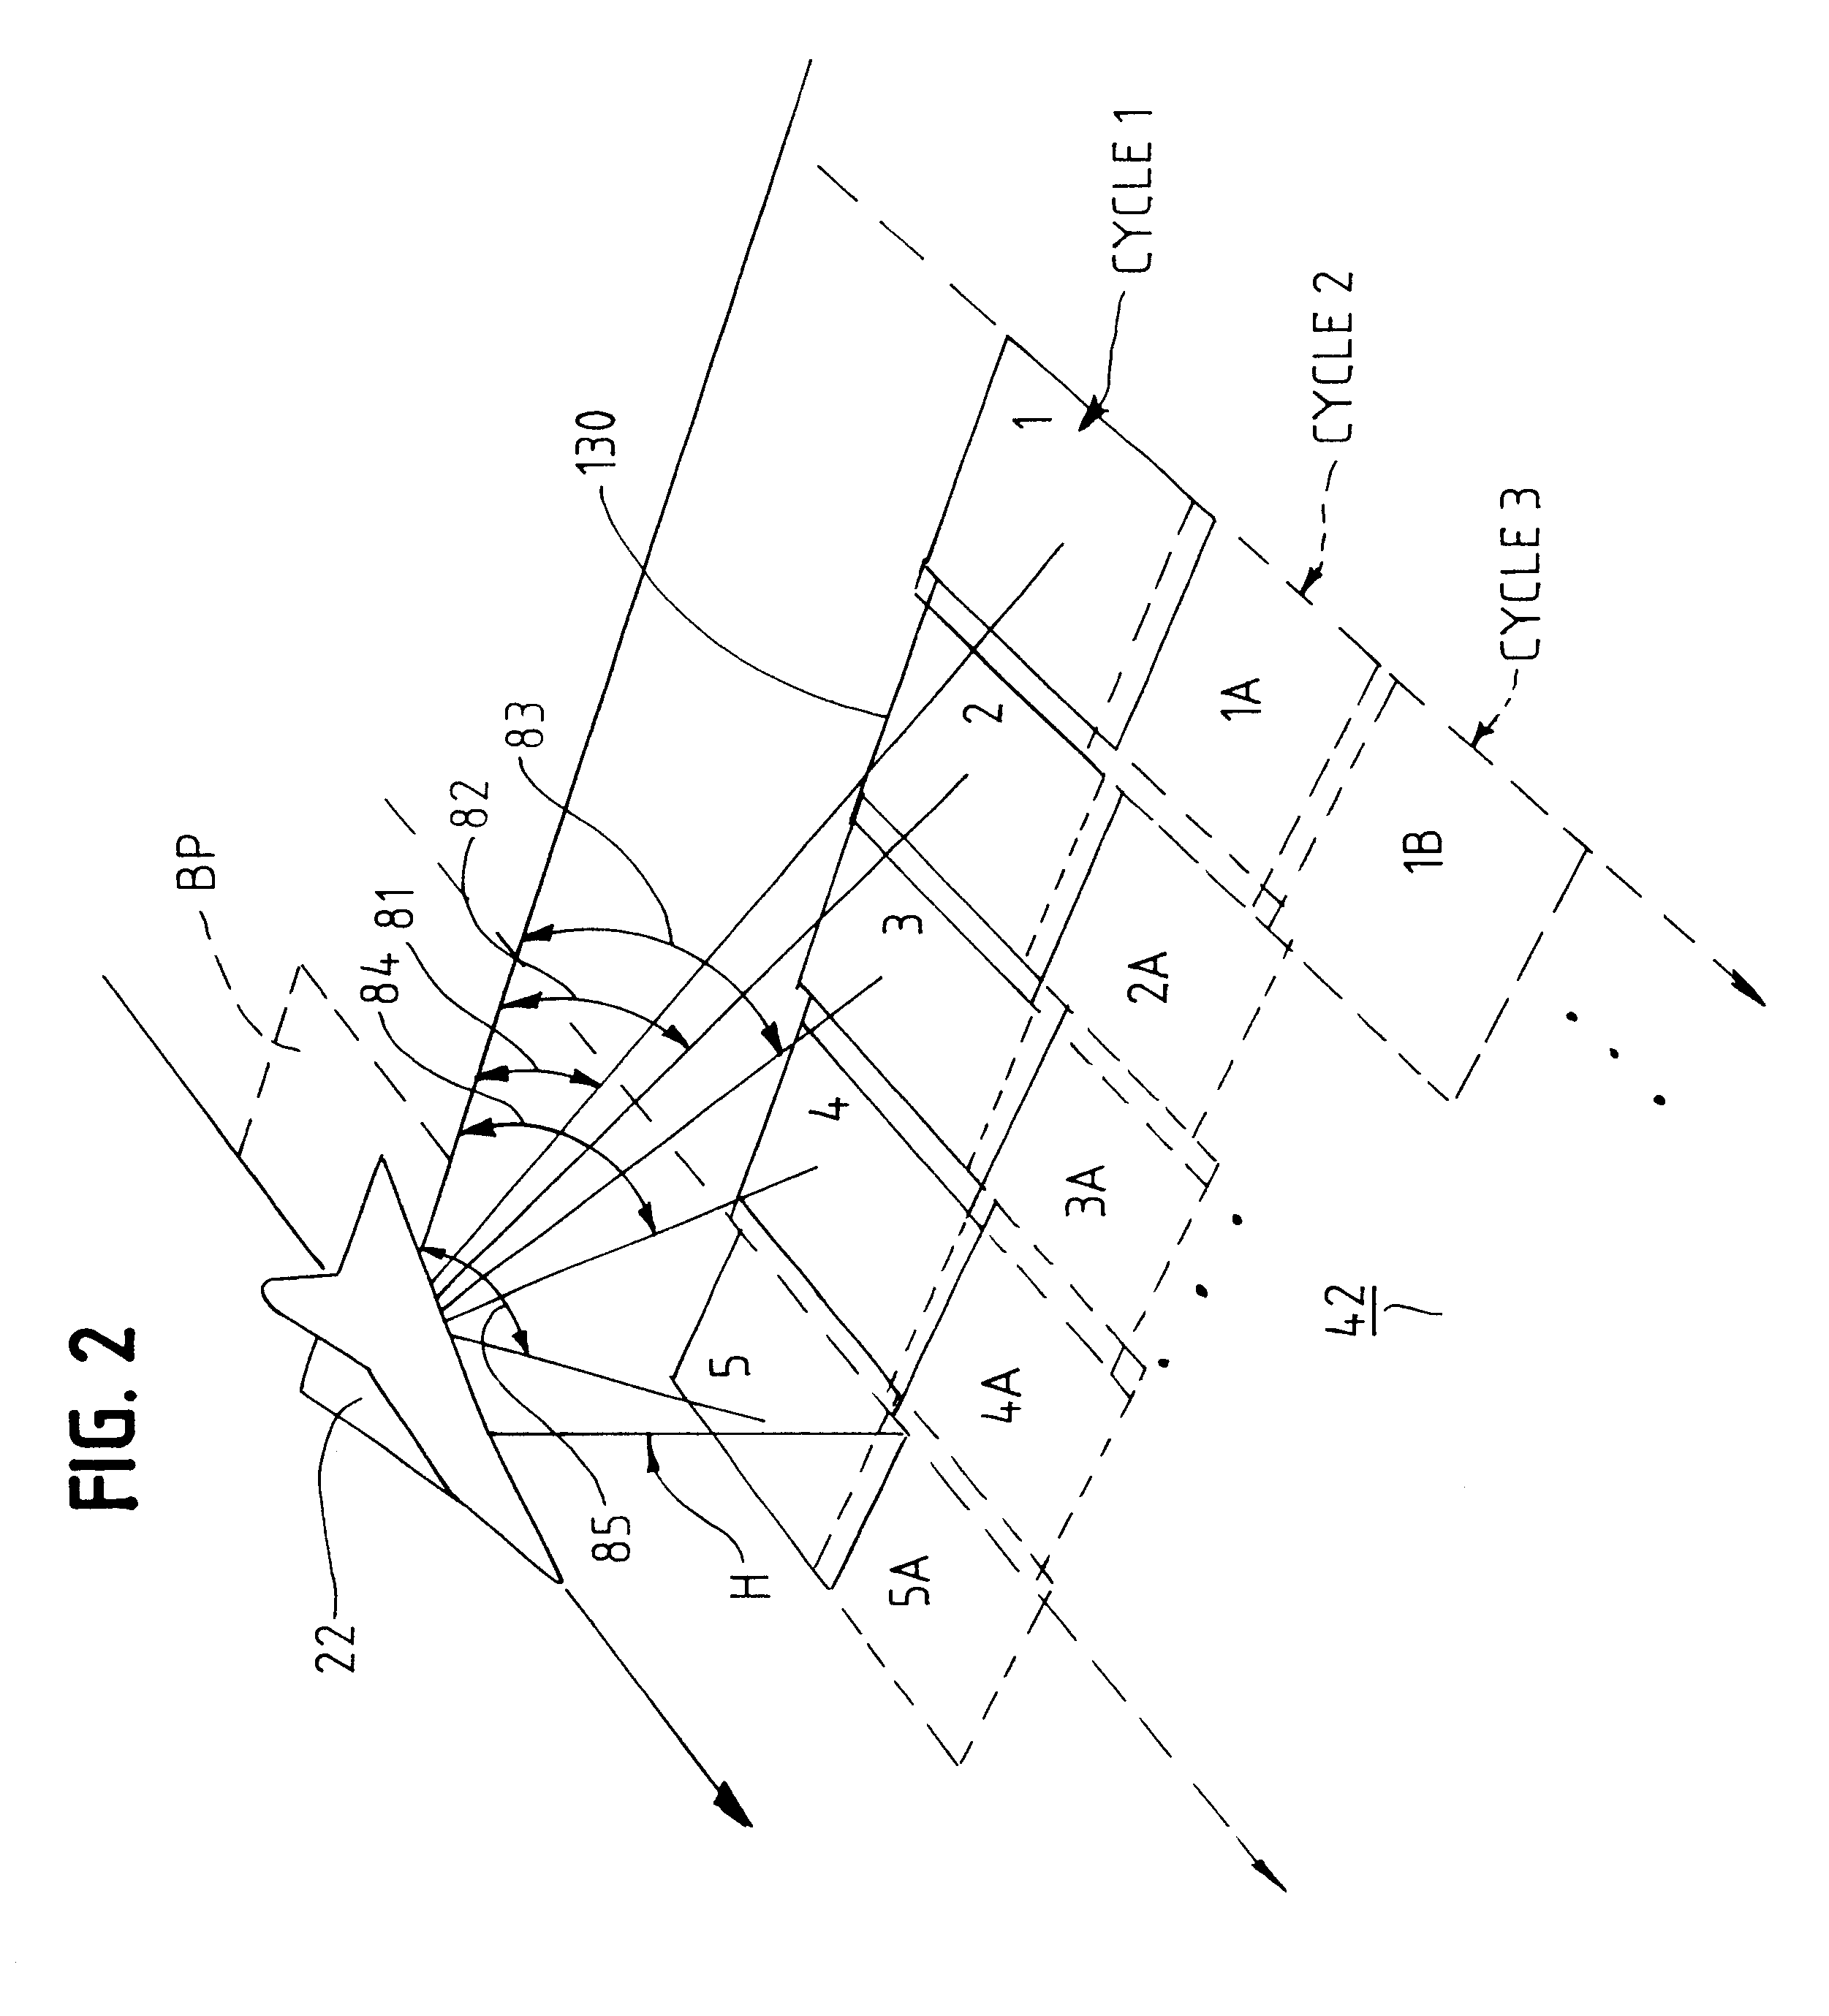 Method of framing reconnaissance with motion roll compensation